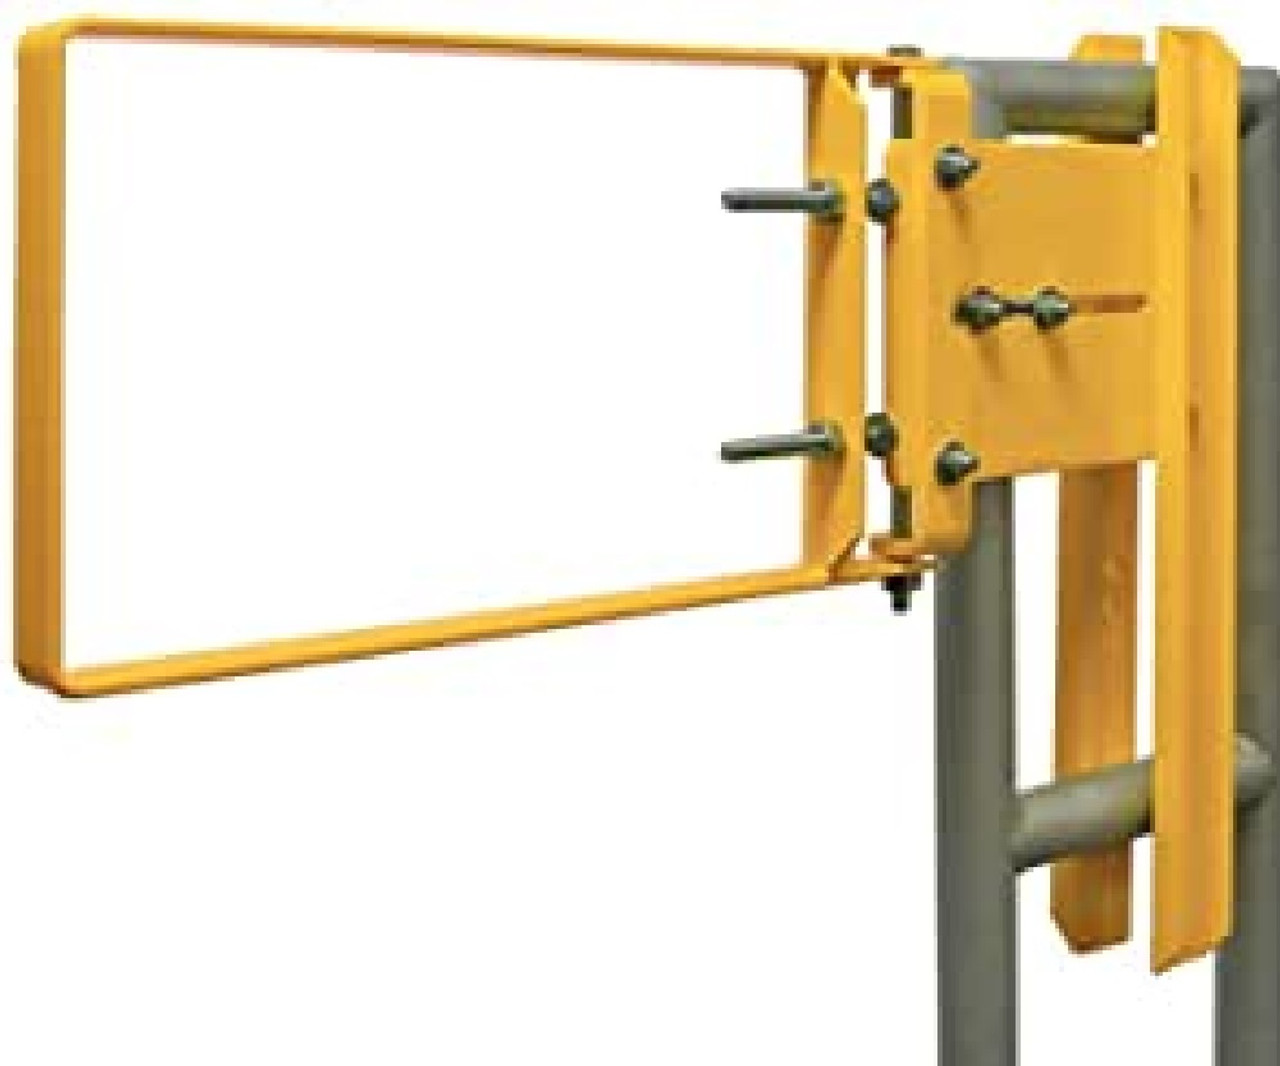 FabEnCo A71-16PC Self-Closing Safety Gate, Galvanized Steel, 18", Yellow [New]